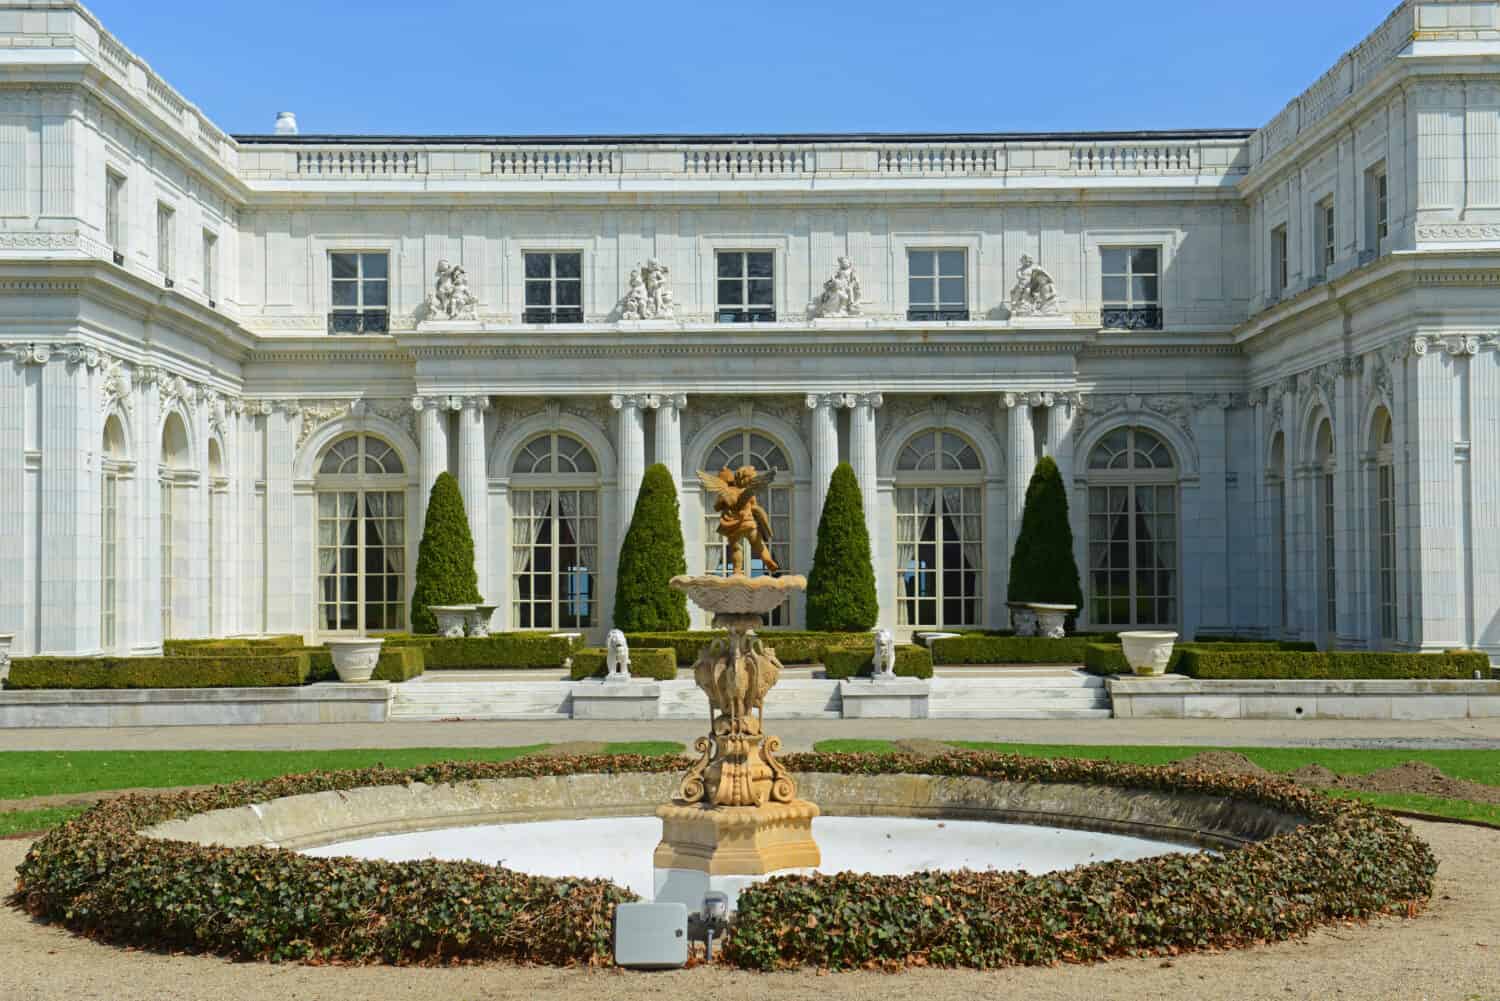 Rosecliff mansion is a Gilded Age mansion with Baroque Revival style in Bellevue Avenue Historic District in Newport , Rhode Island RI, USA. 